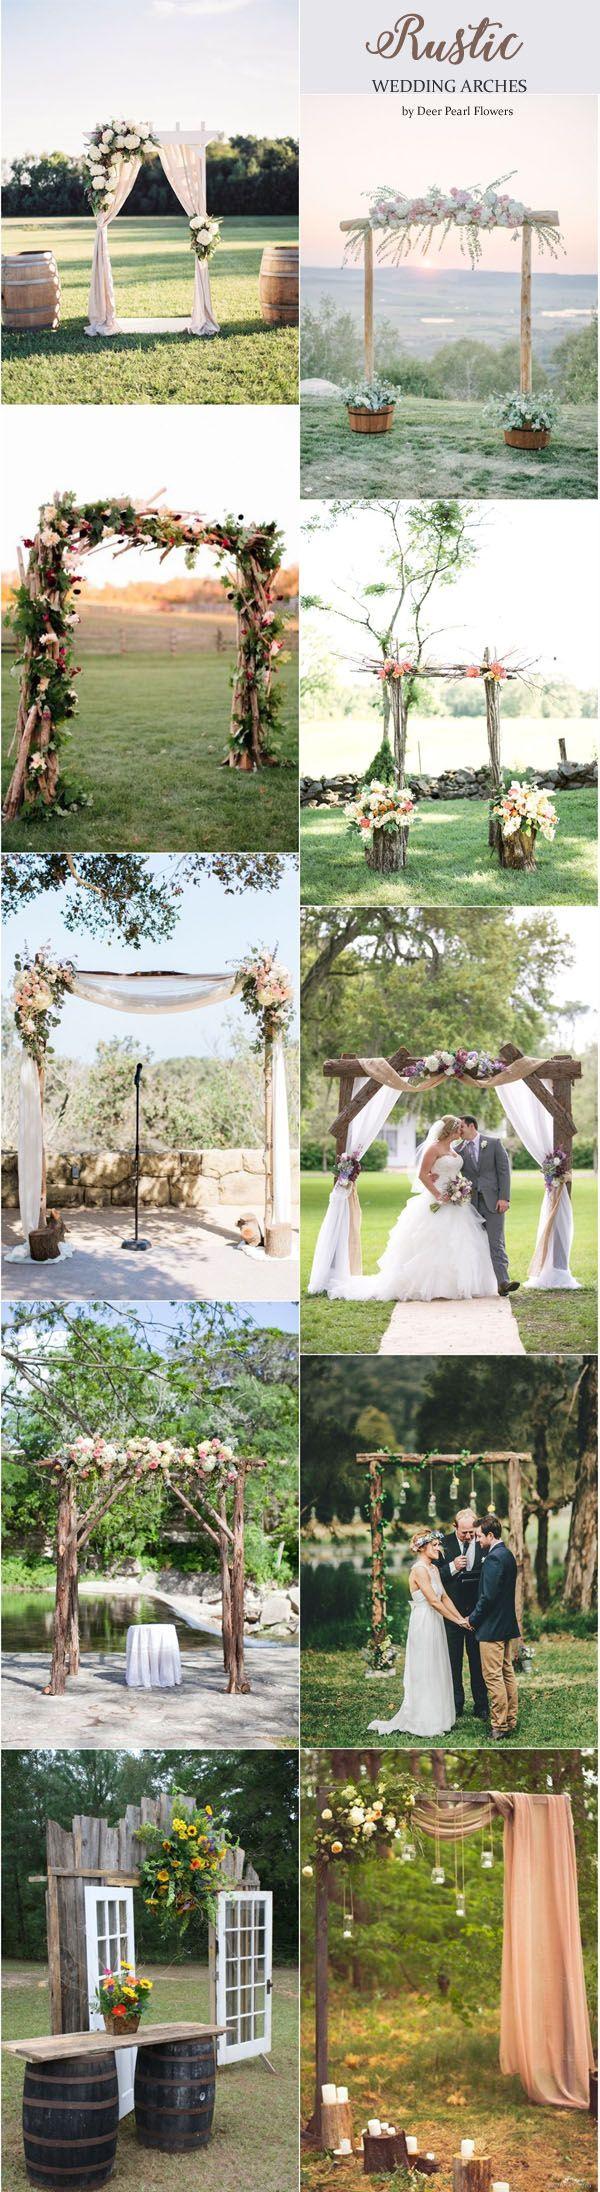 Wedding - 45 Amazing Wedding Ceremony Arches And Altars To Get Inspired